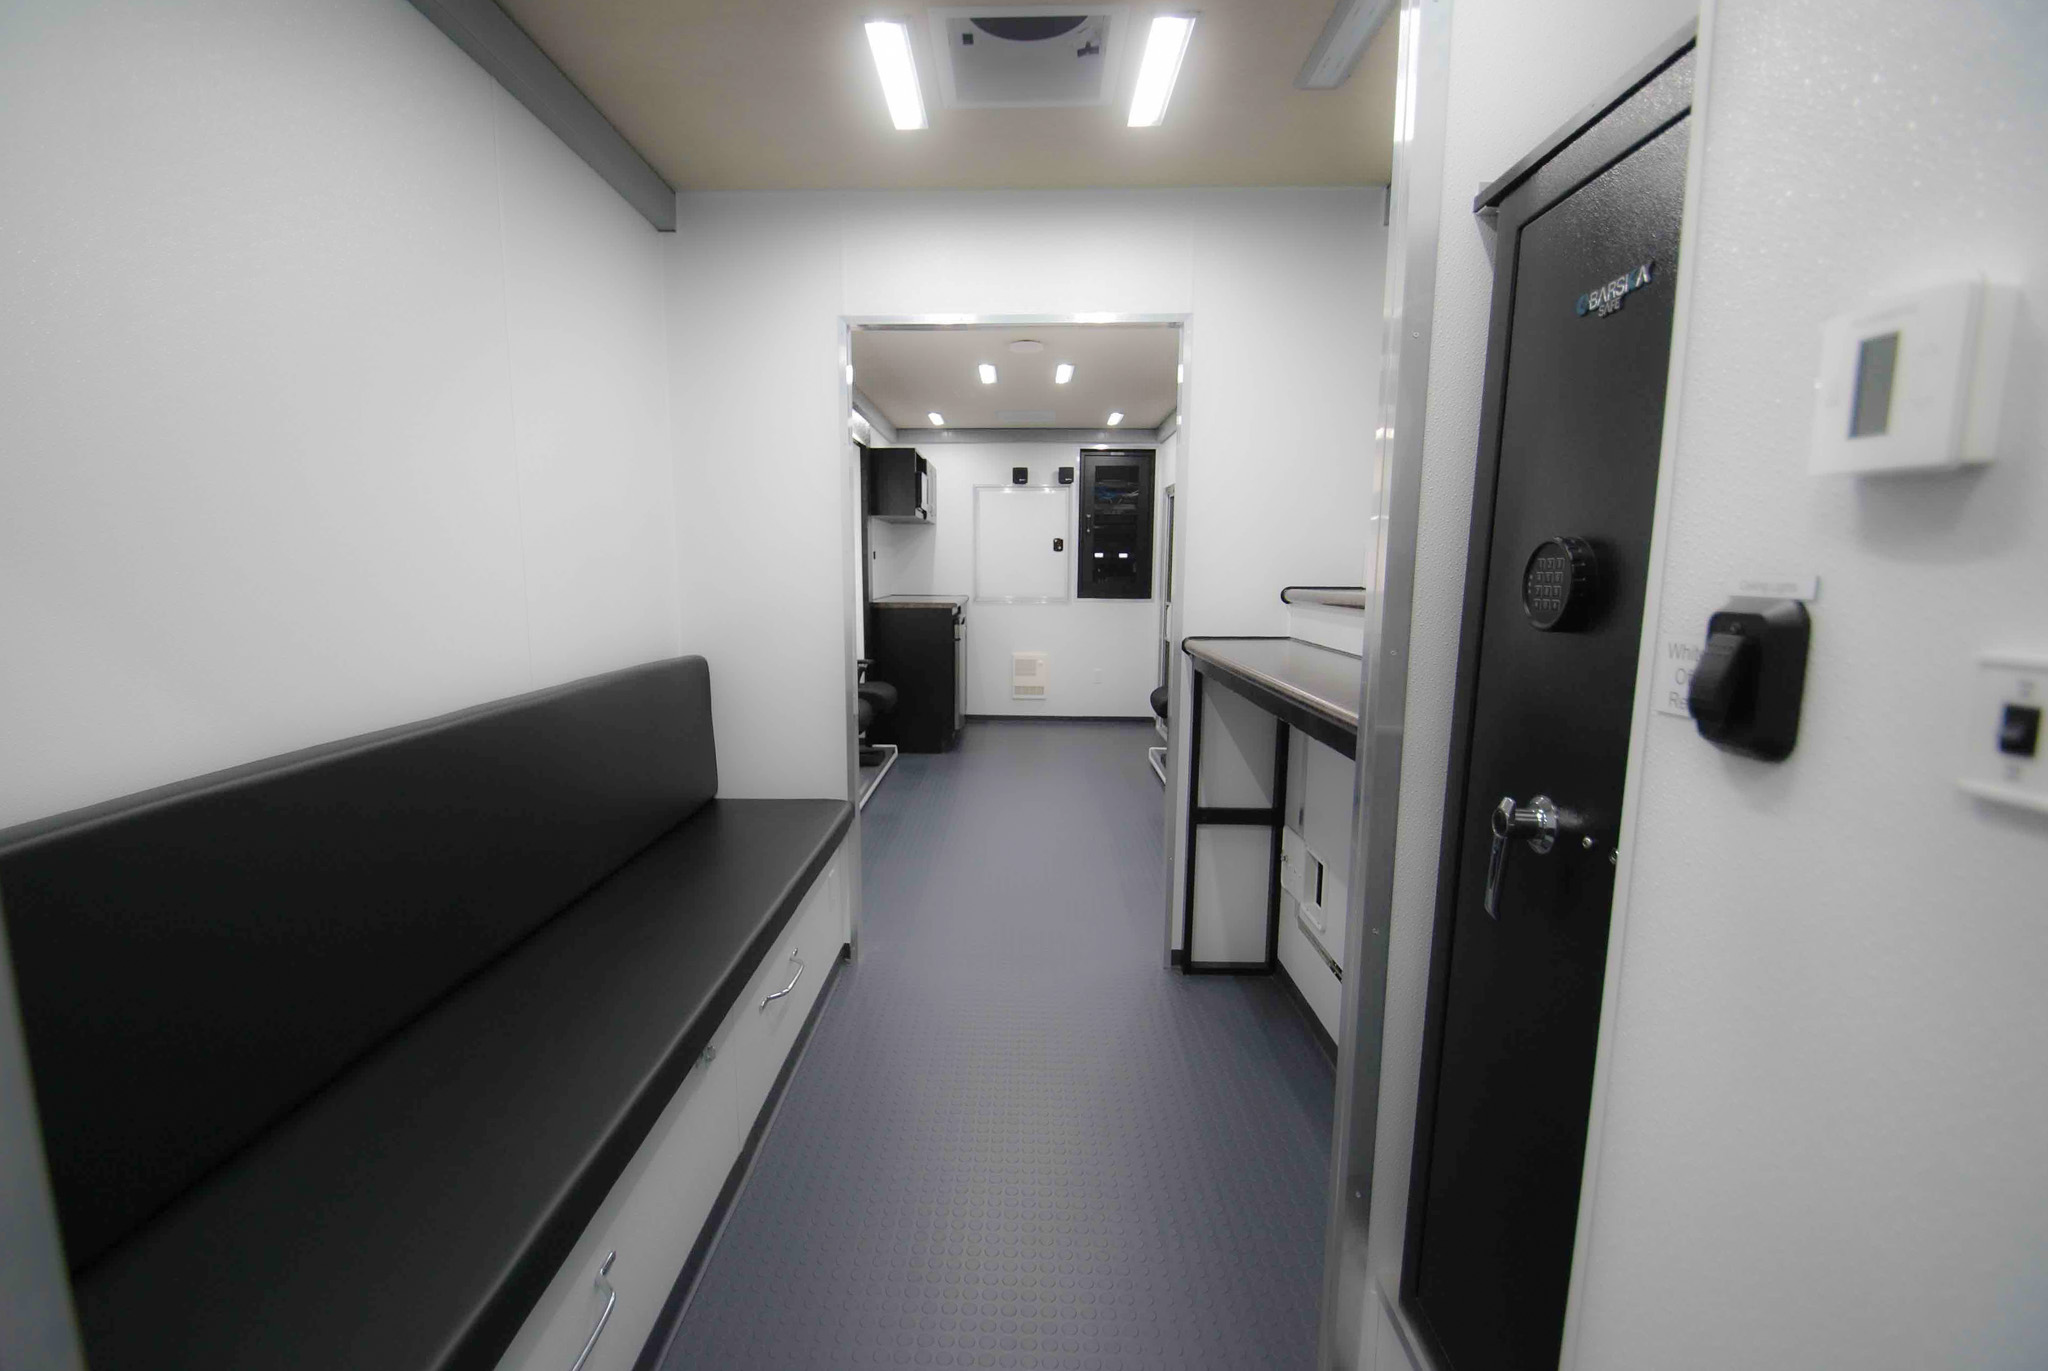 The interior of Atlanta Border Patrol's unit showcasing bench seating, a desk, and a server cabinet.